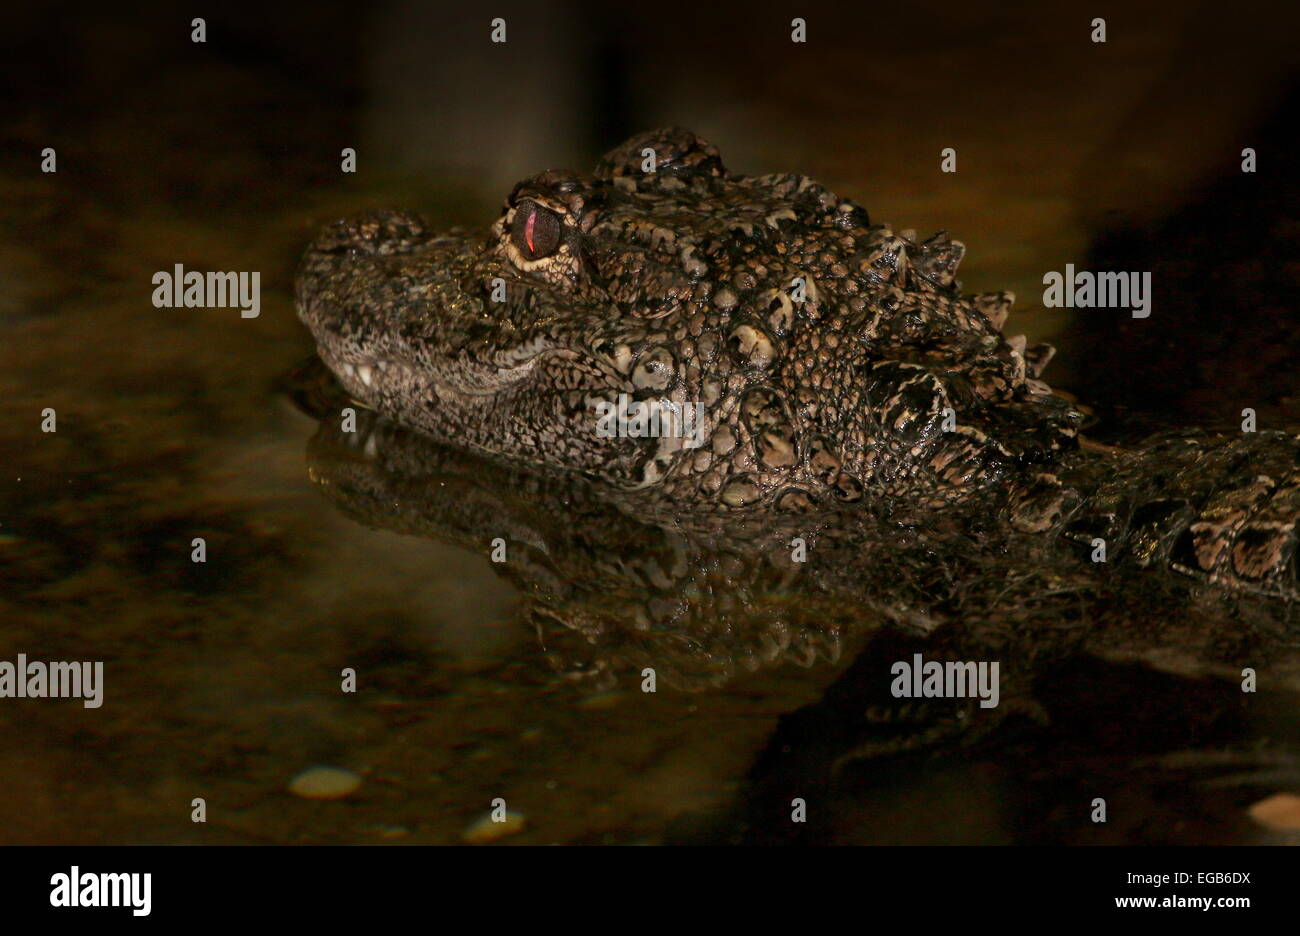 Close-up of the small fully-armoured Chinese alligator (Alligator sinensis) Stock Photo